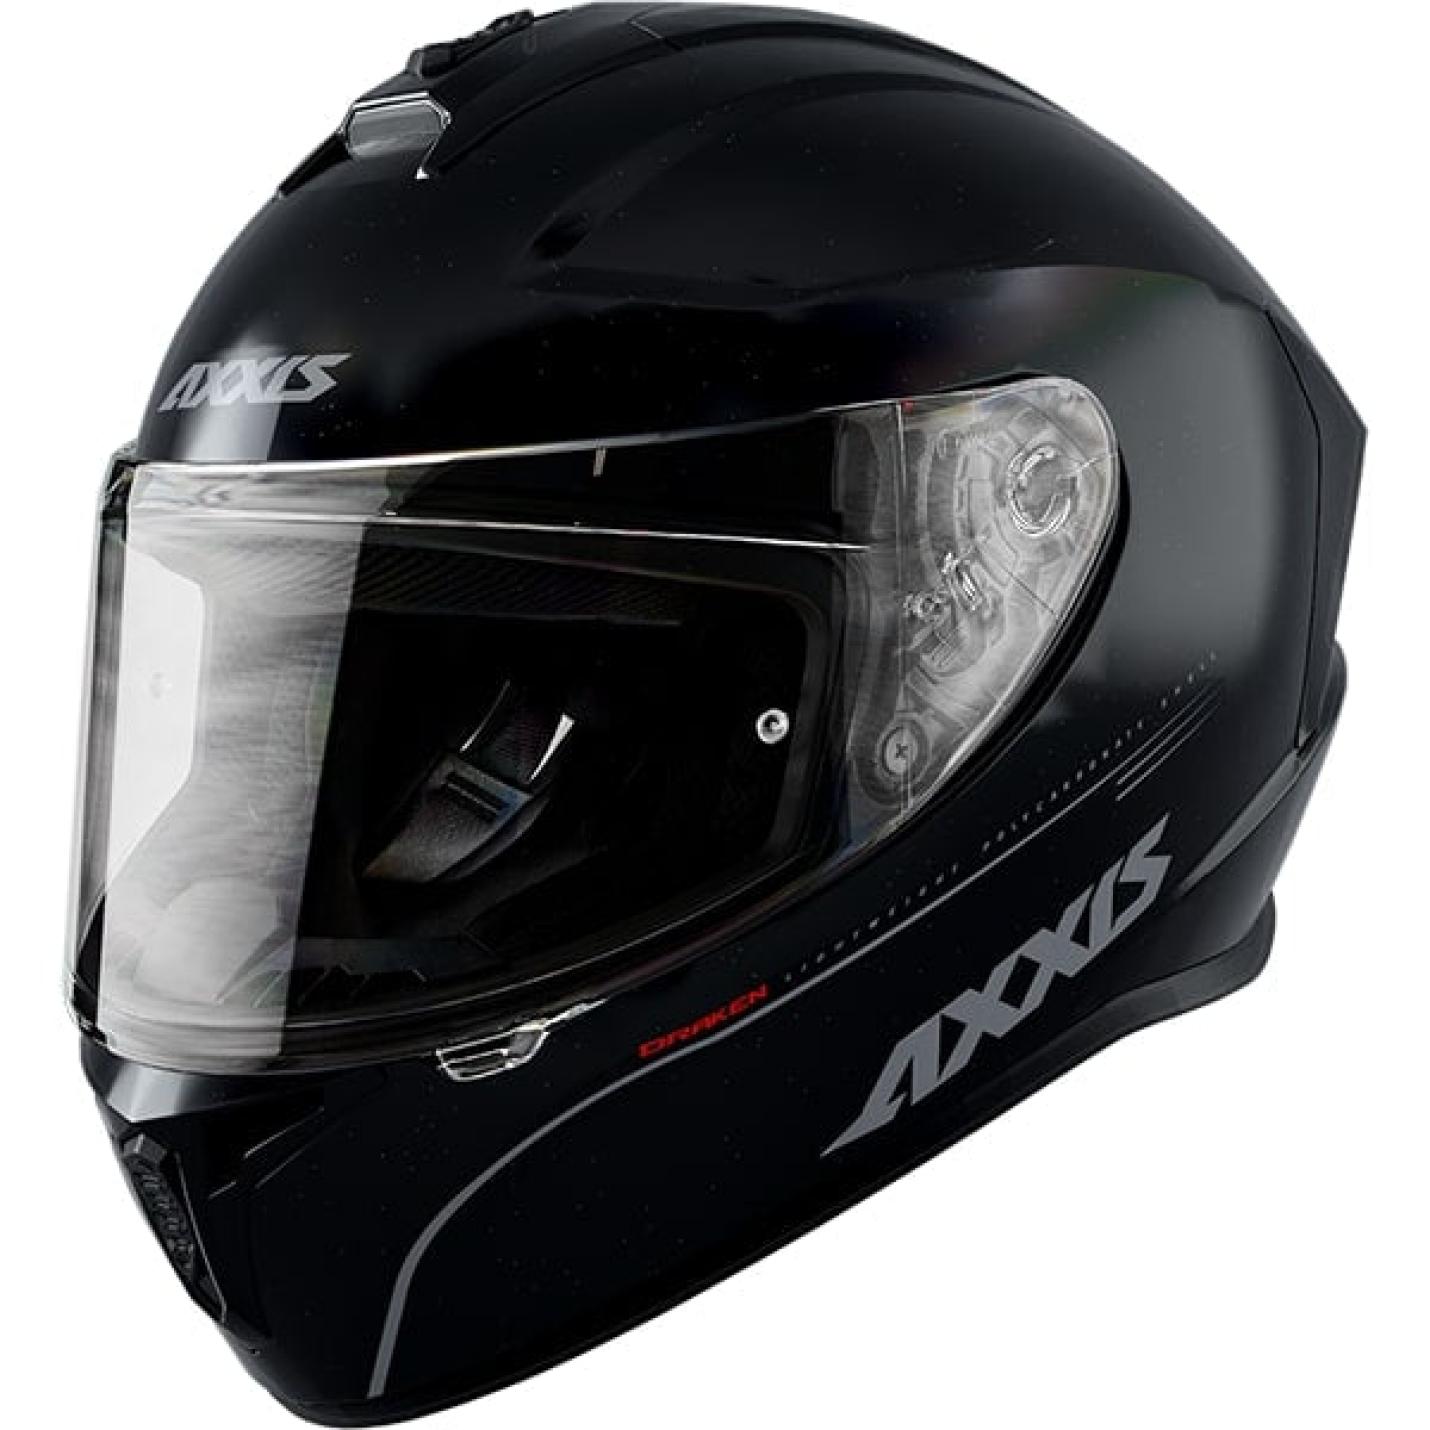 Helm Axxis Draken Solid Glans Zwart XS AE-trading